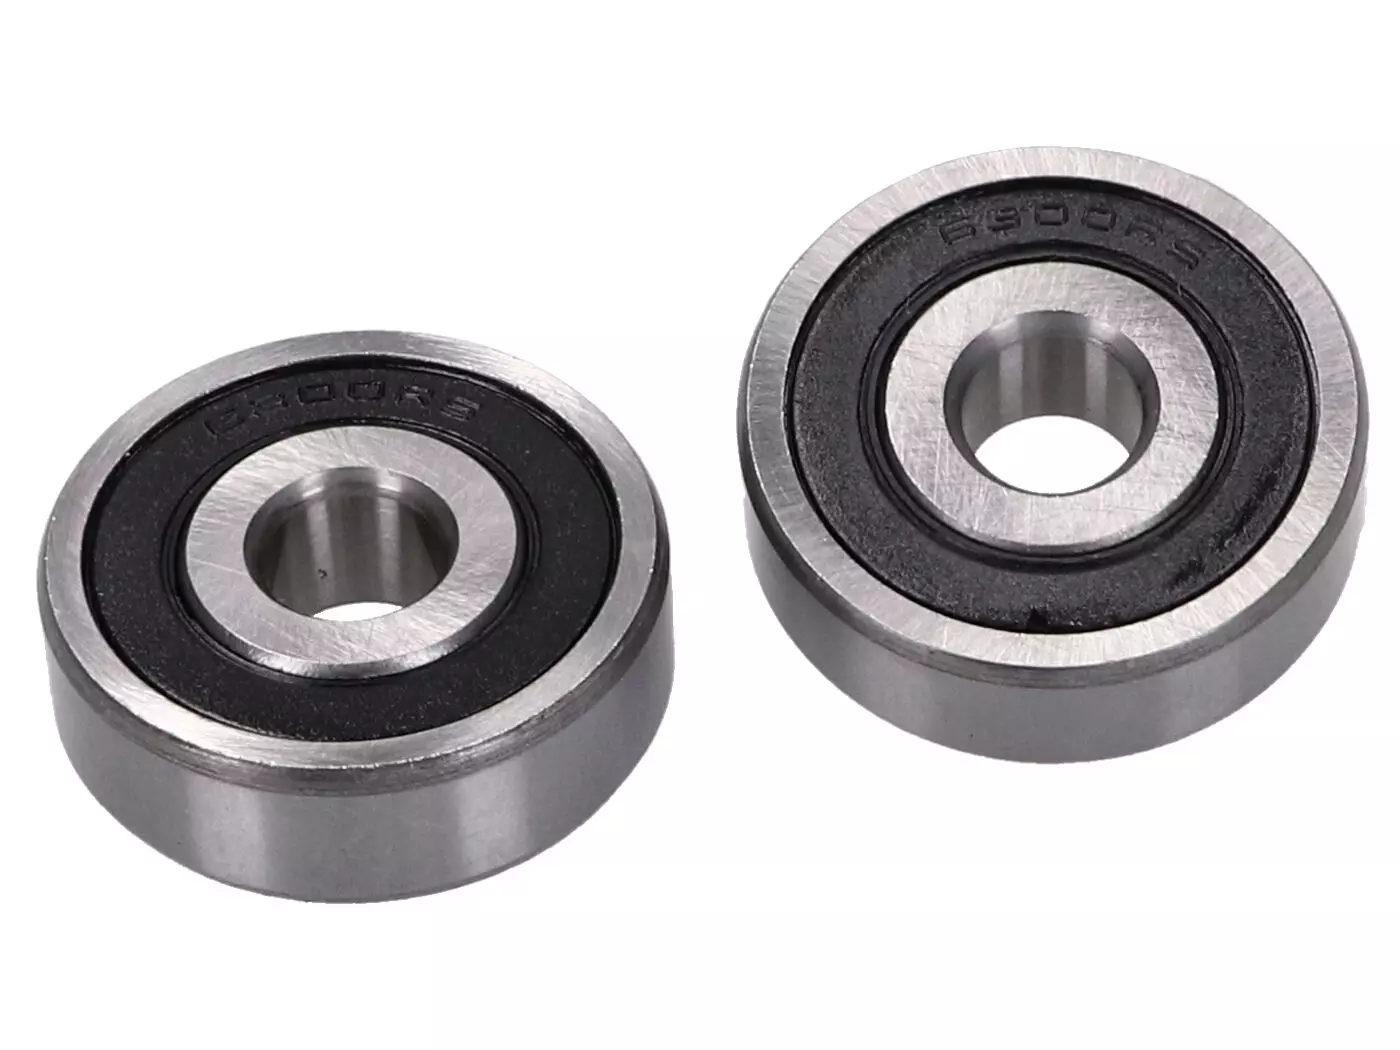 Wheel Bearing Set Front Axle For Yamaha DT 50 R, ST, MX -1994